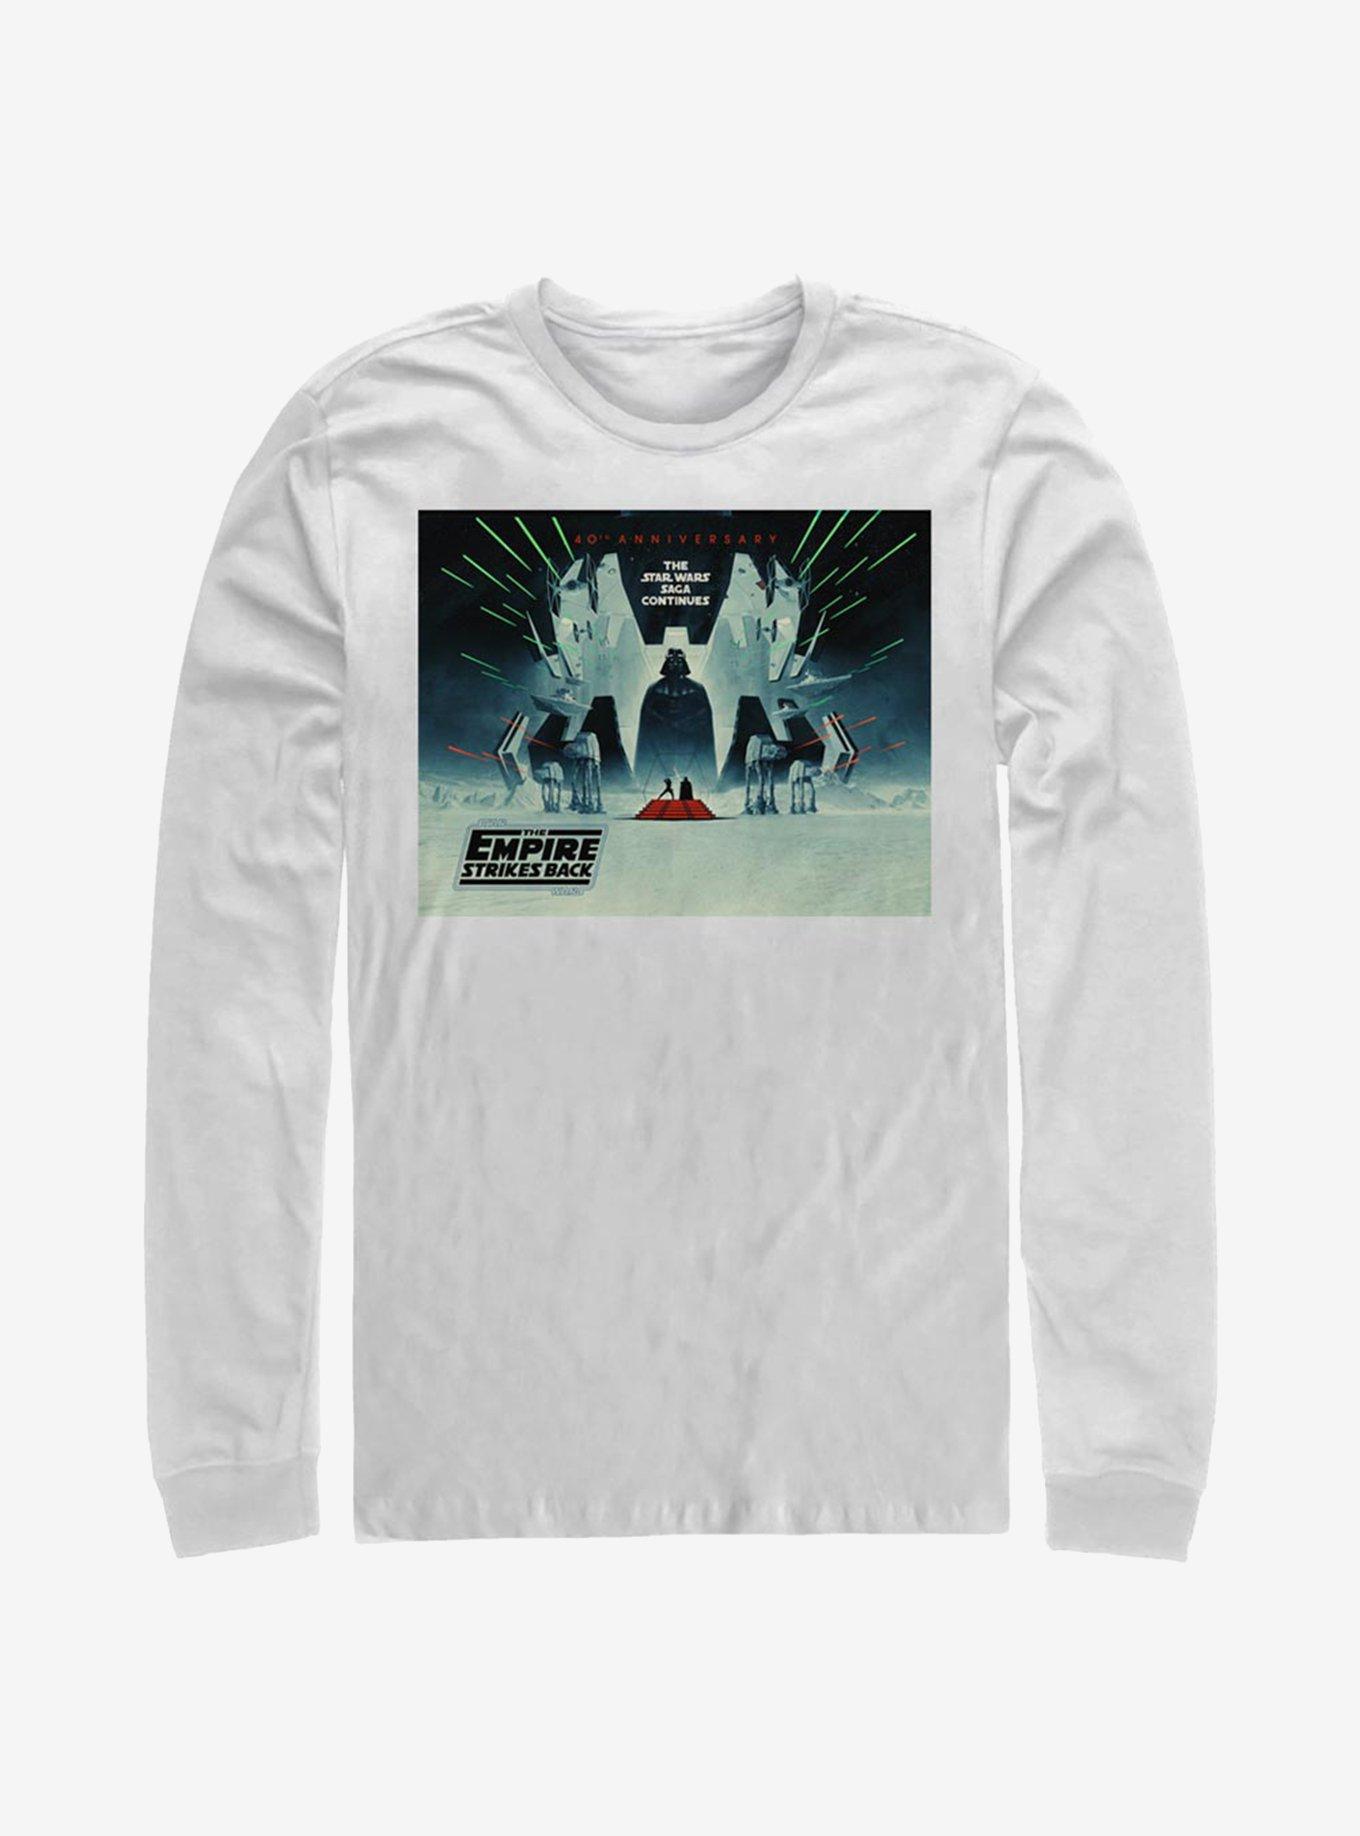 Star Wars The Empire Strikes Back Square Poster Long-Sleeve T-Shirt, WHITE, hi-res